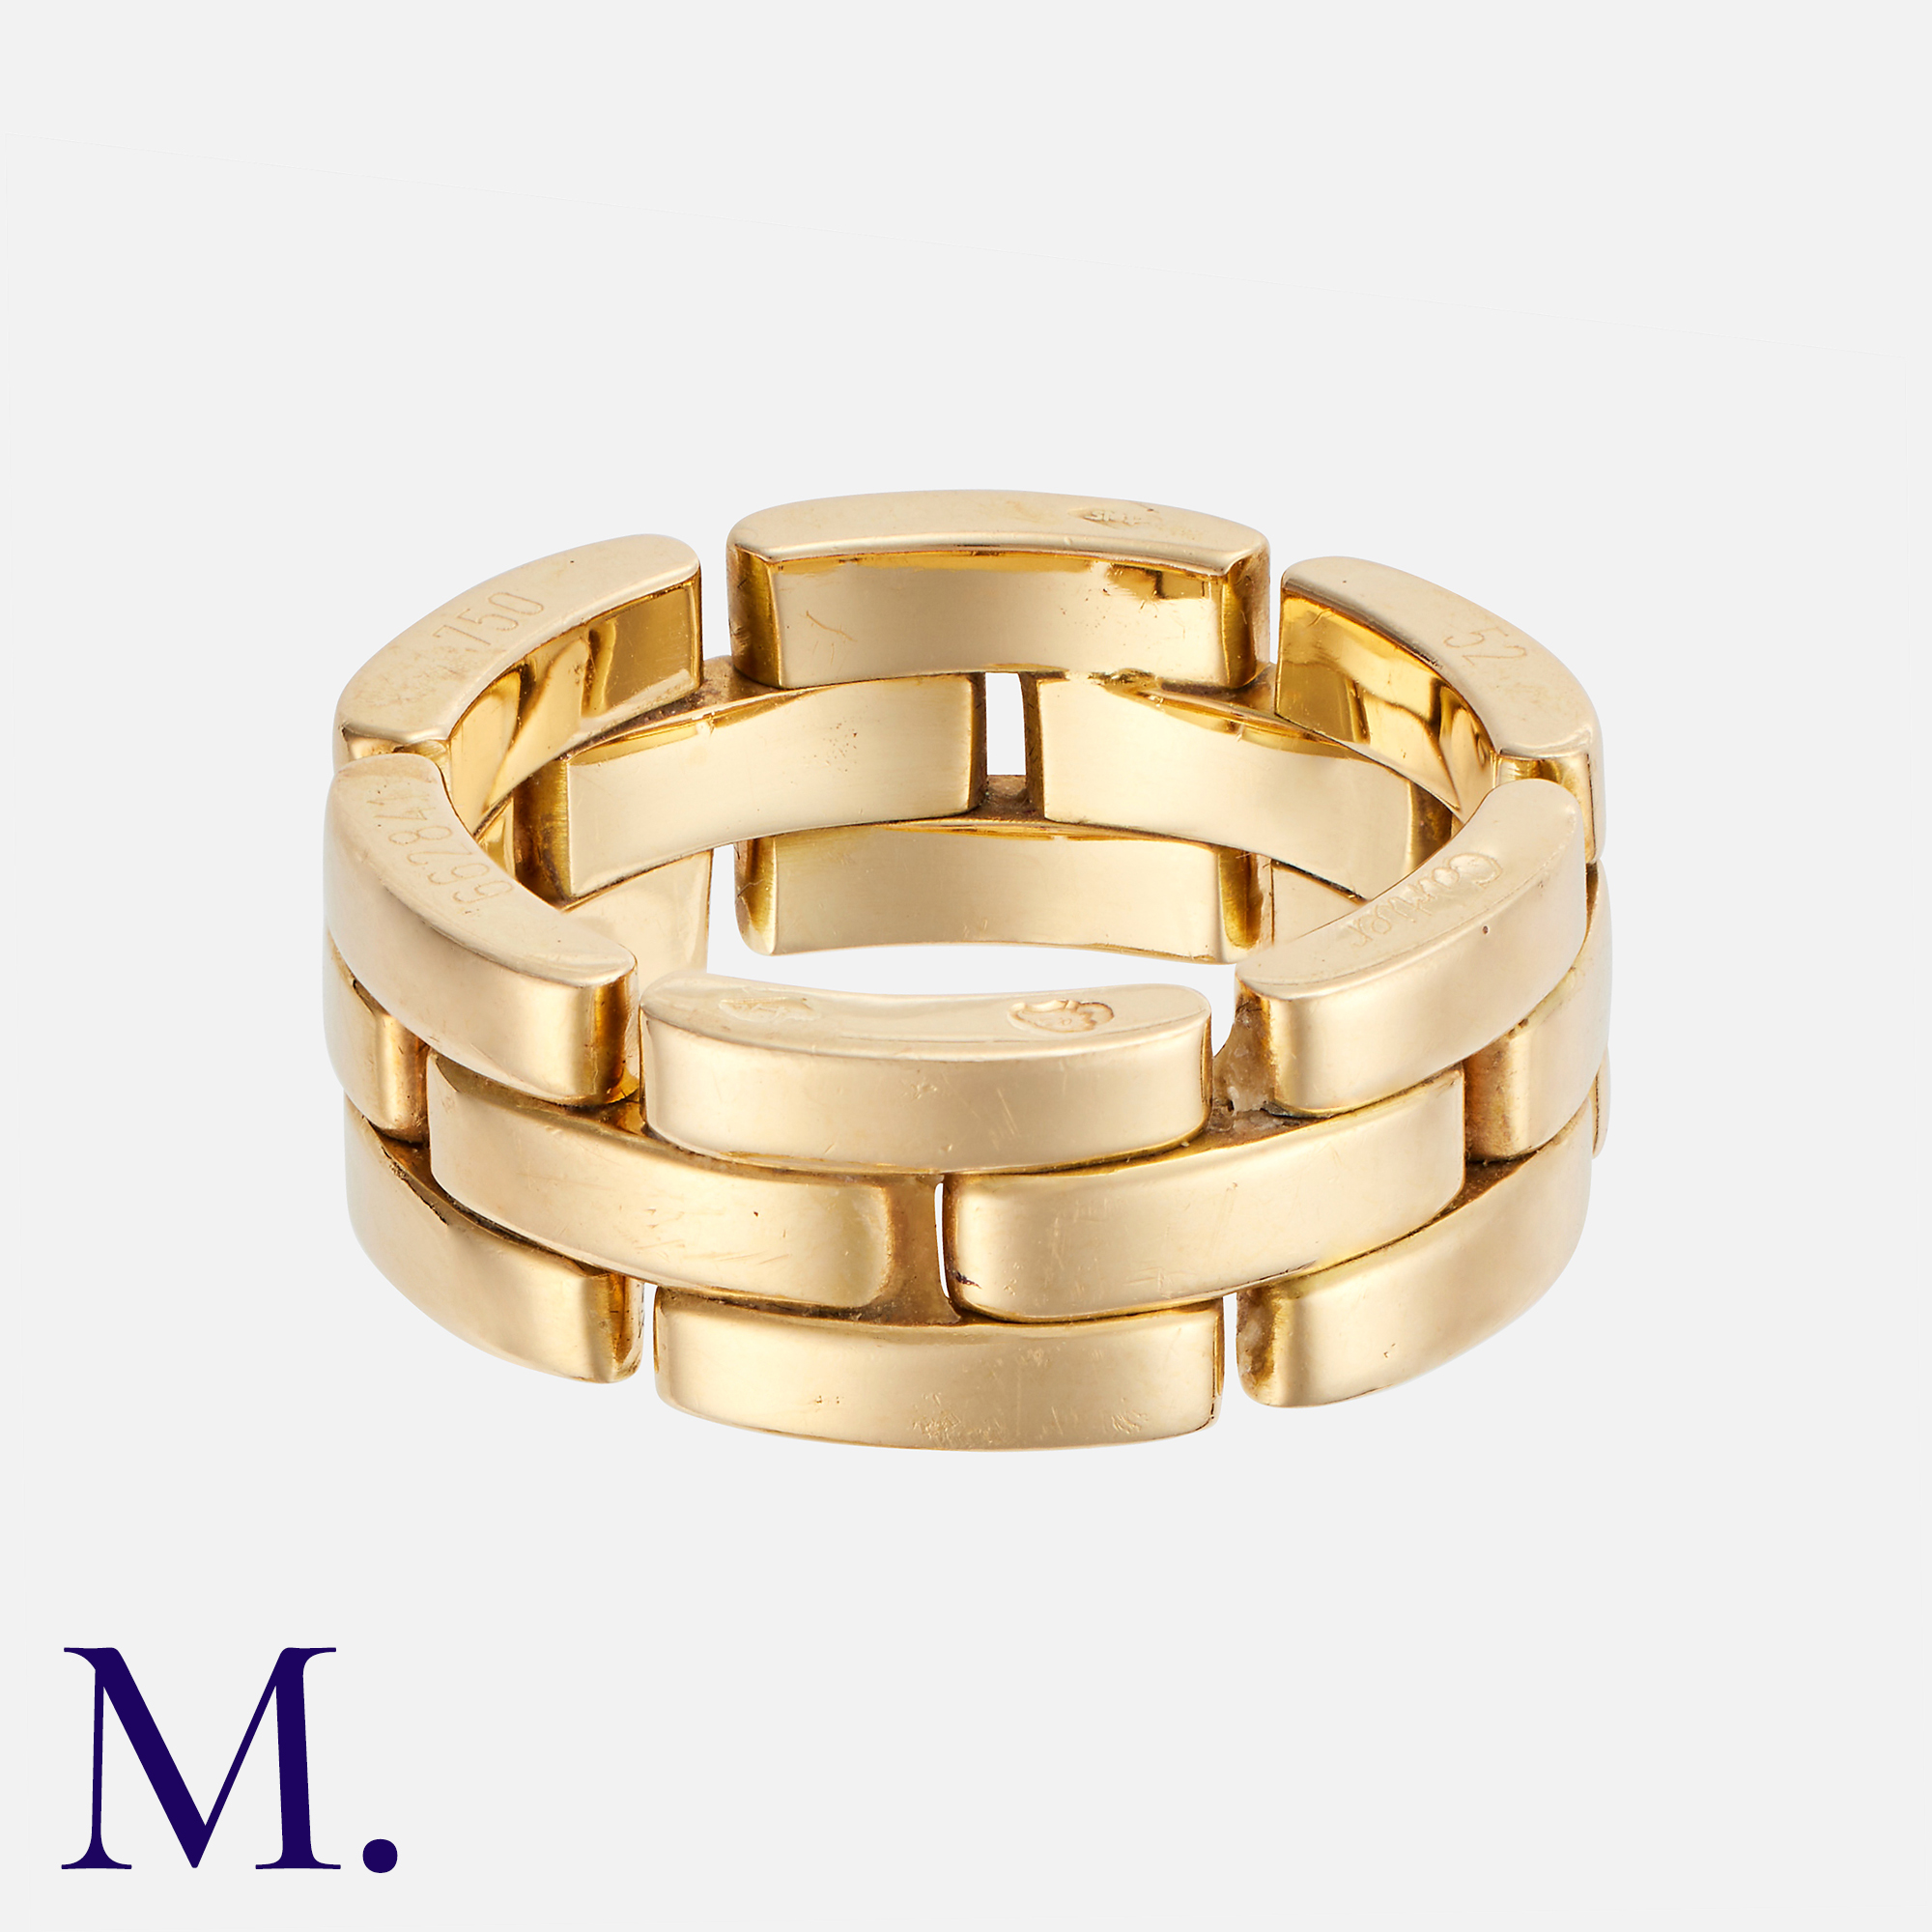 CARTIER. A Maillon Panthère Ring in 18K yellow gold. Signed Cartier and serial numbered. Size: L-M - Image 2 of 3